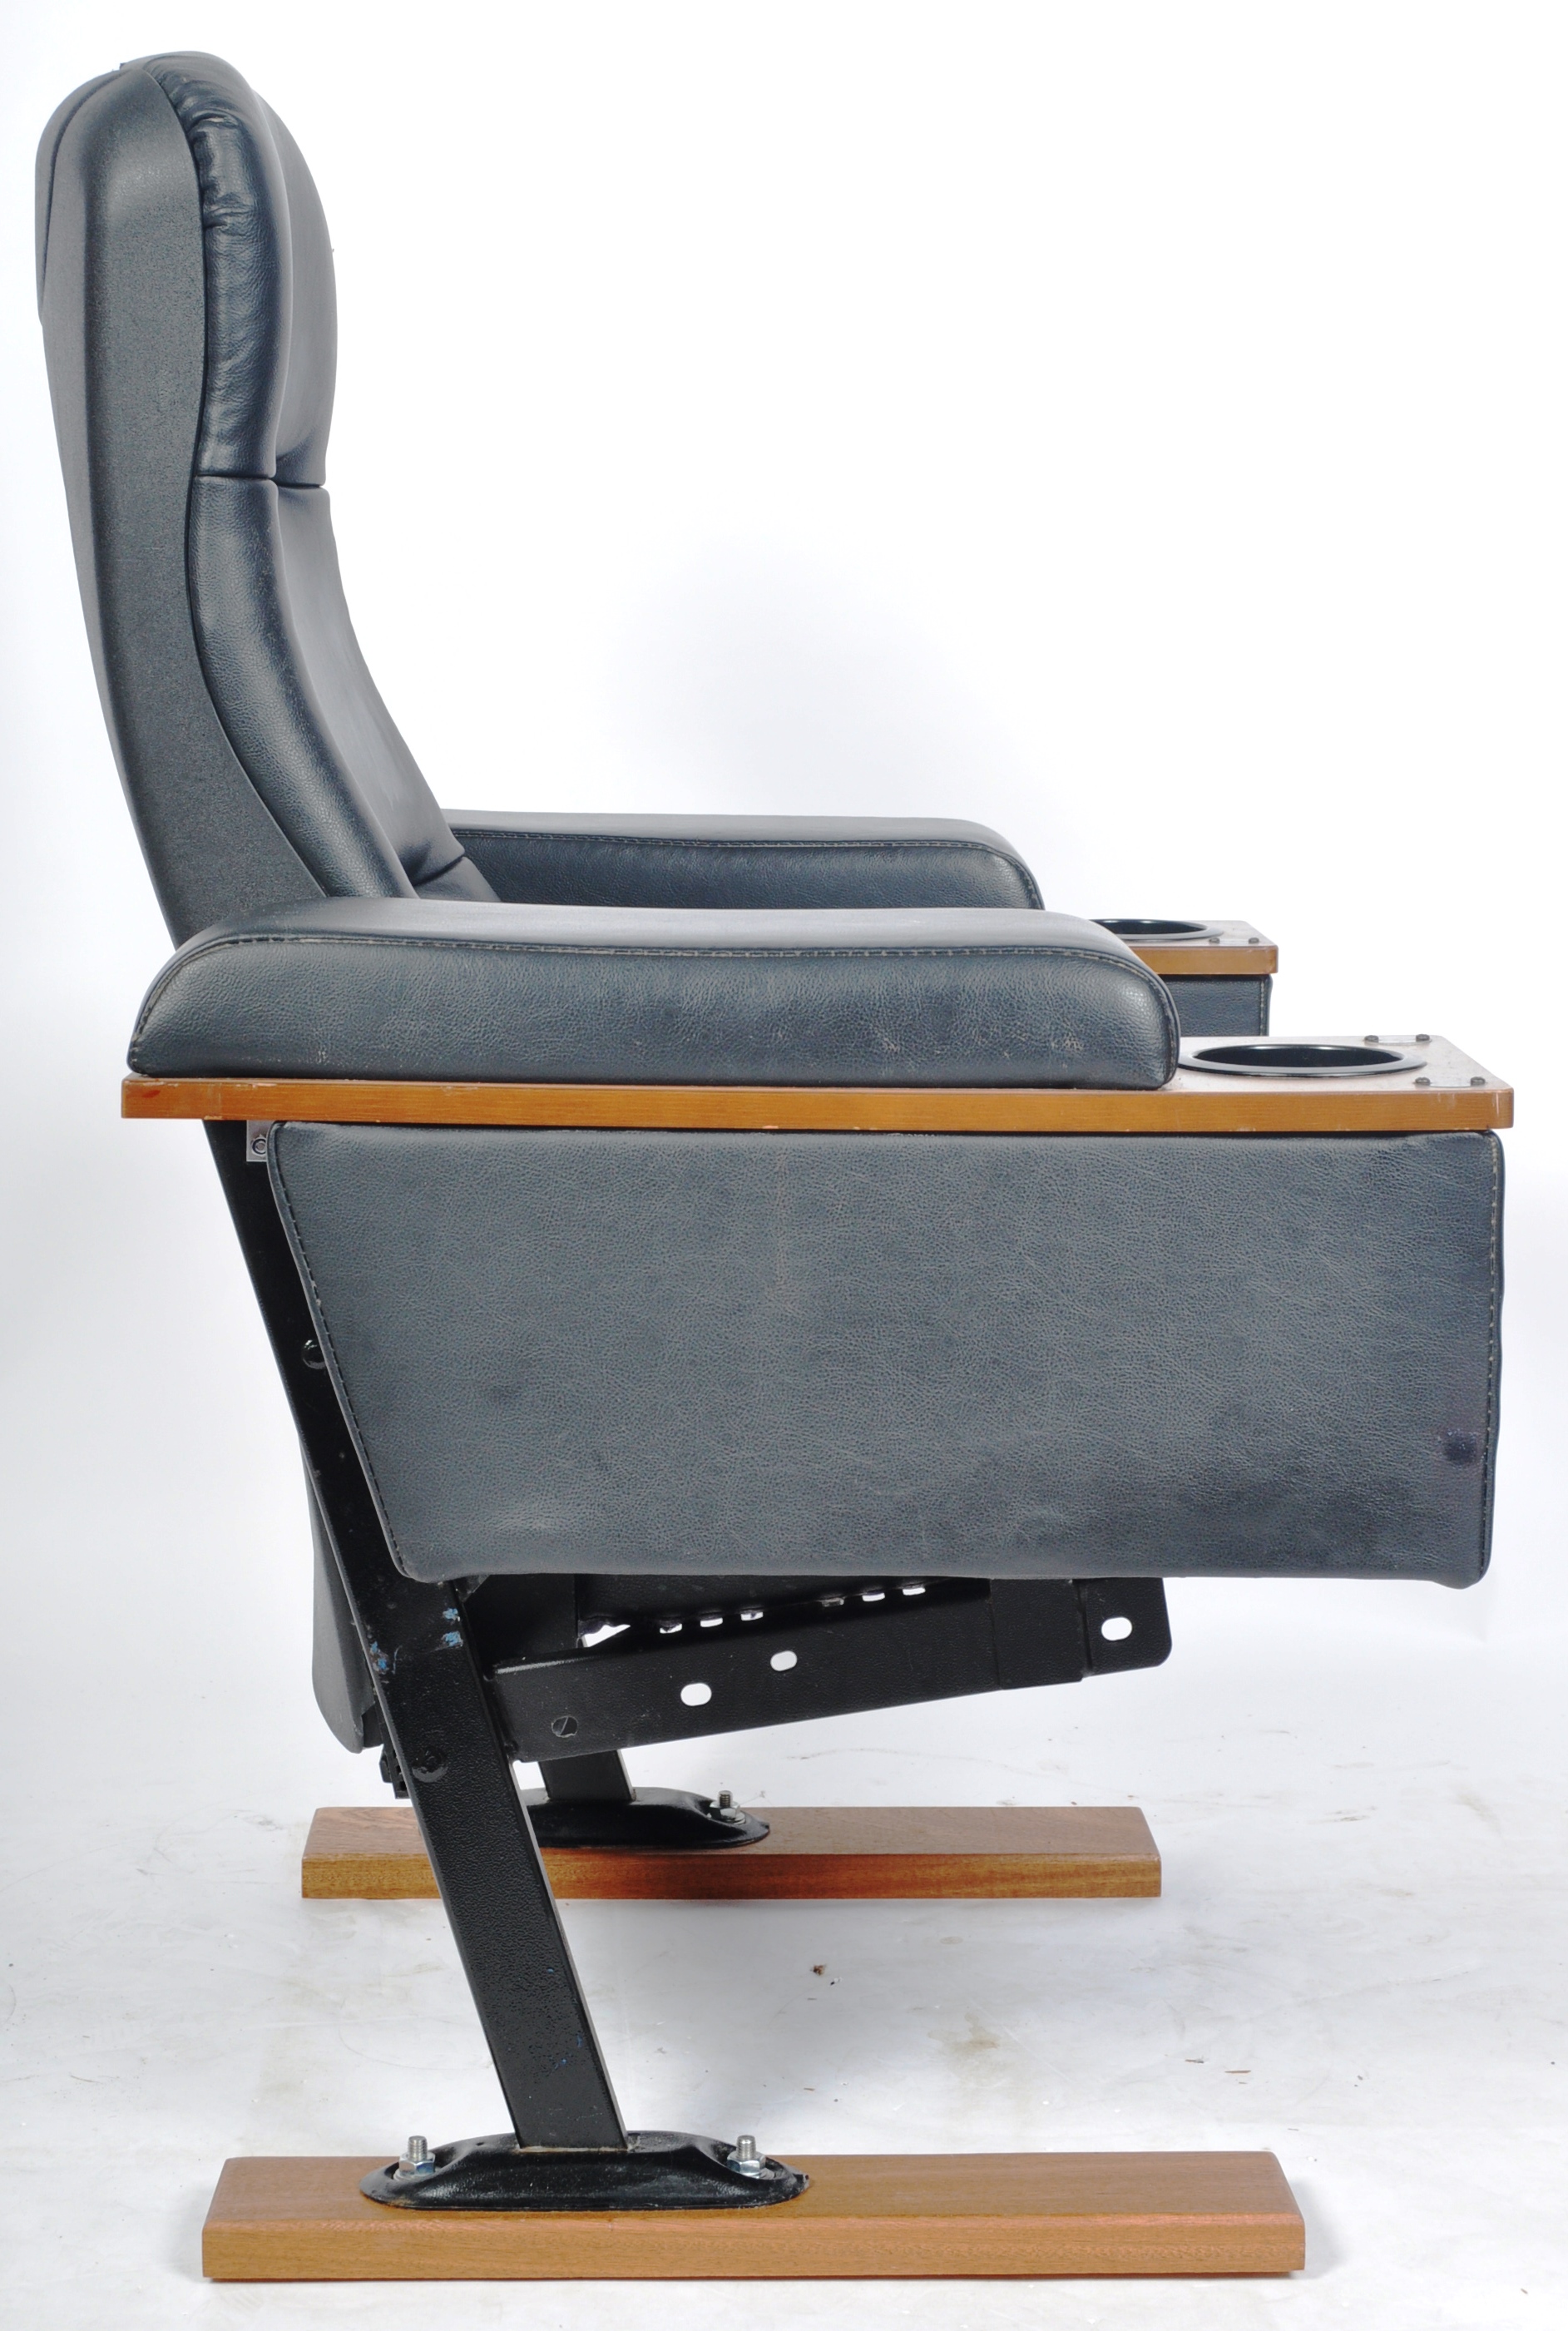 20TH CENTURY LARGE HOME CINEMA / GAMING CHAIR - Image 8 of 11